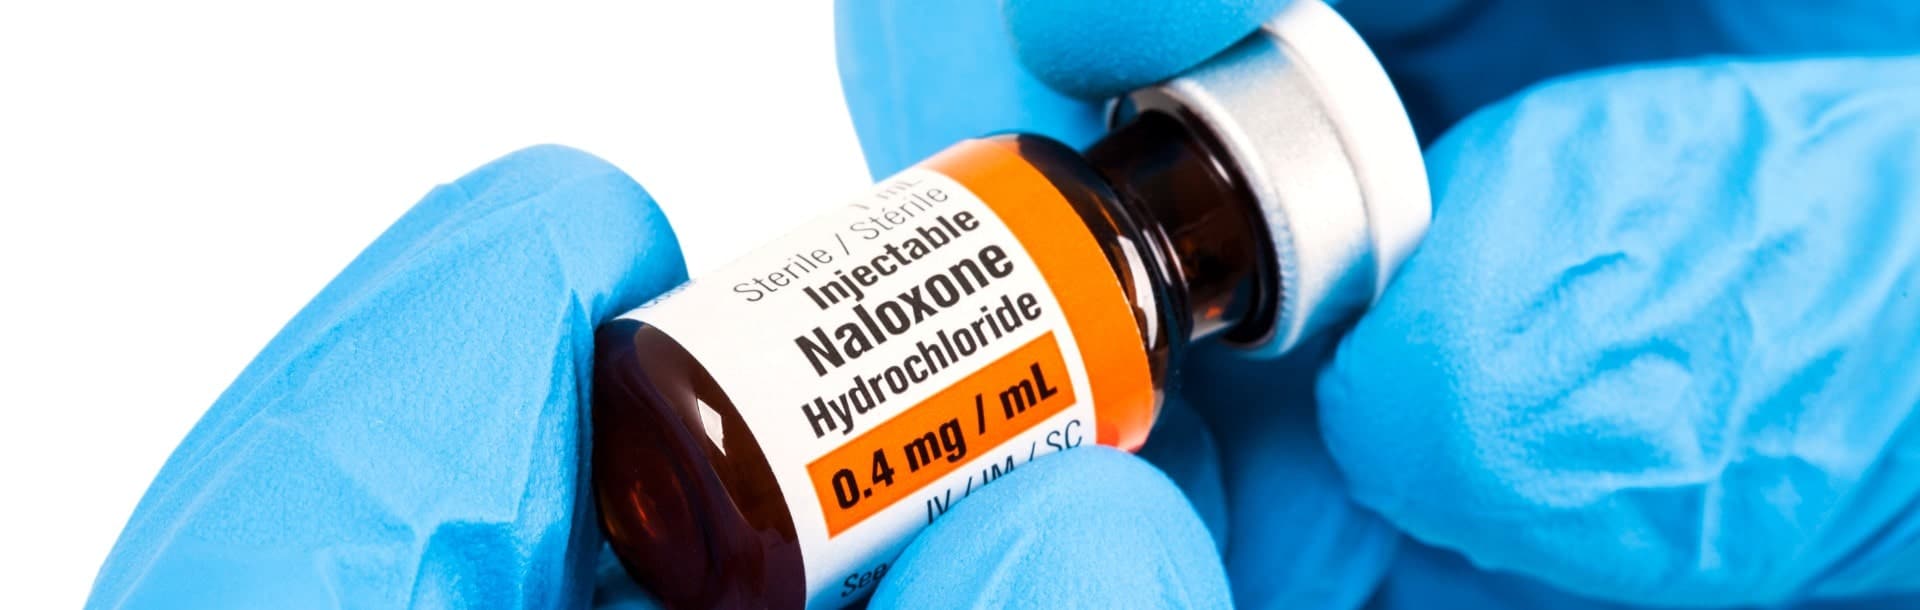 Naloxone being used after opioid overdose